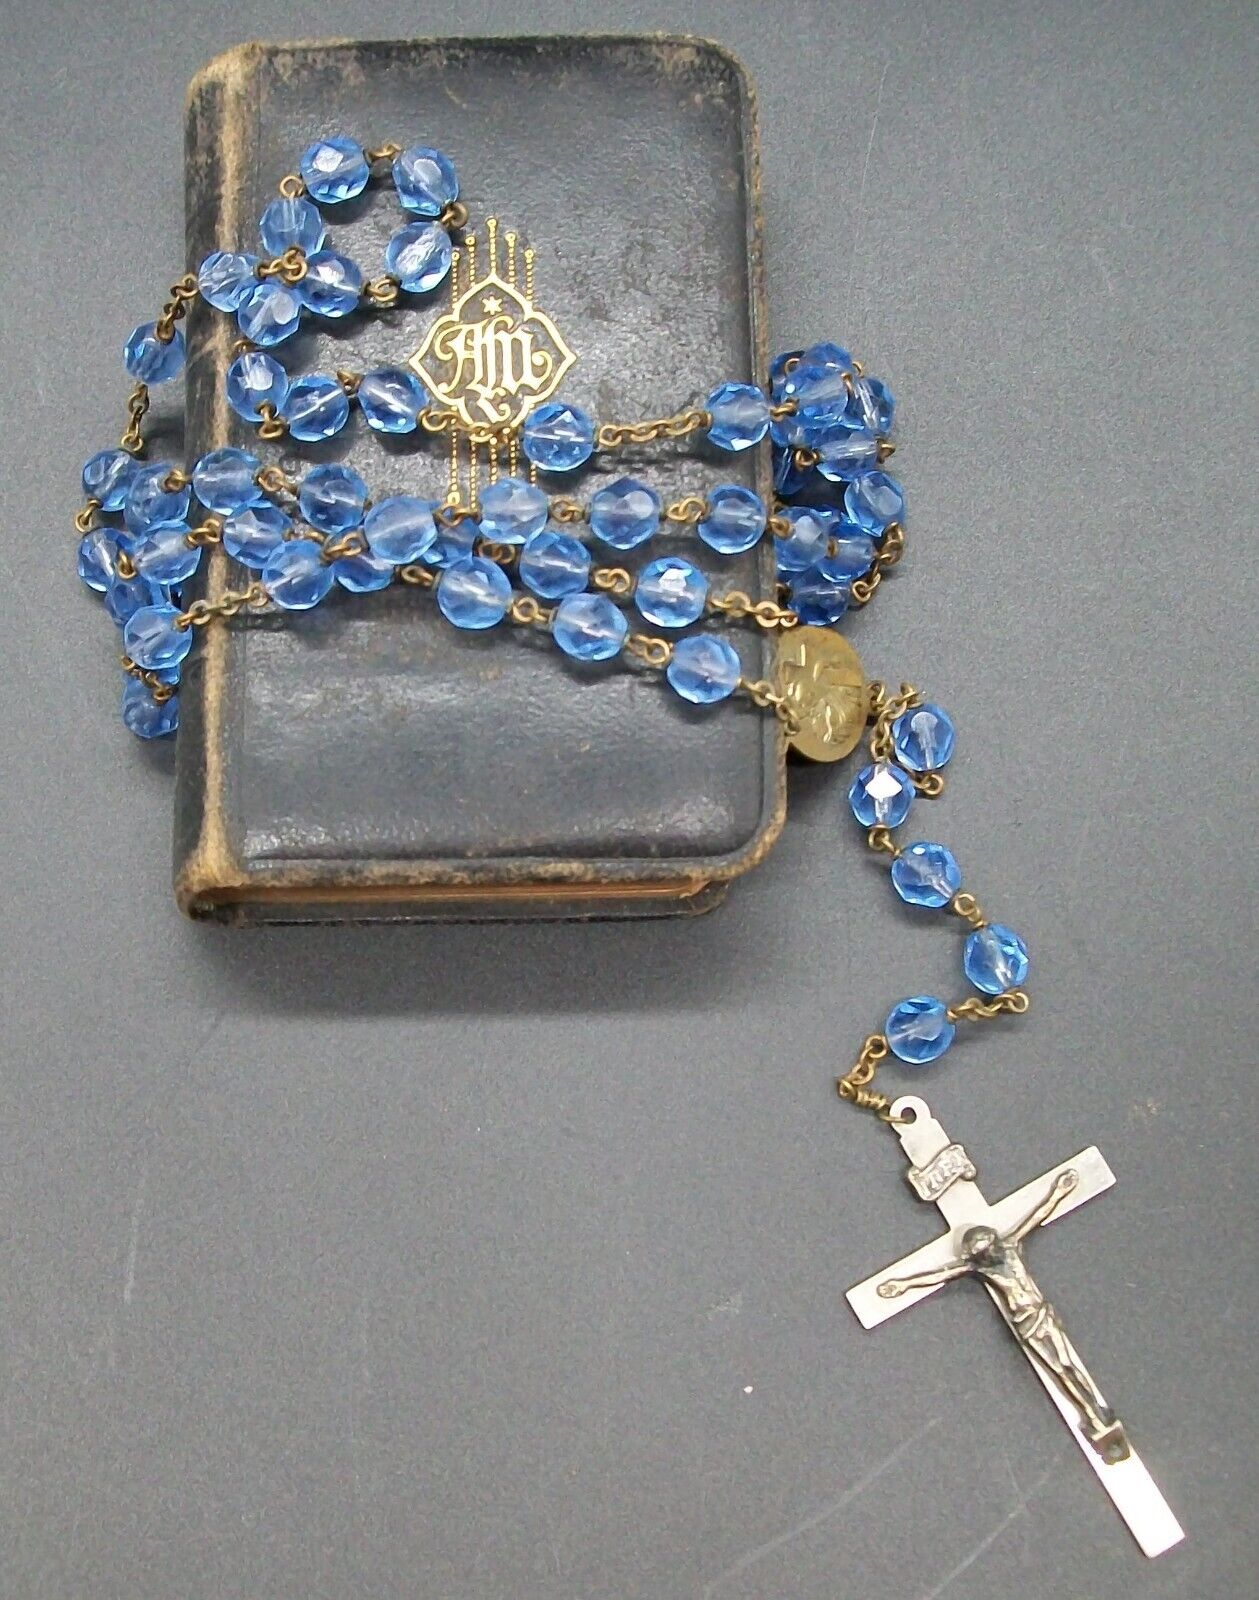 Small Antique Catholic Prayer Book early 1900's with Box Antique Rosery